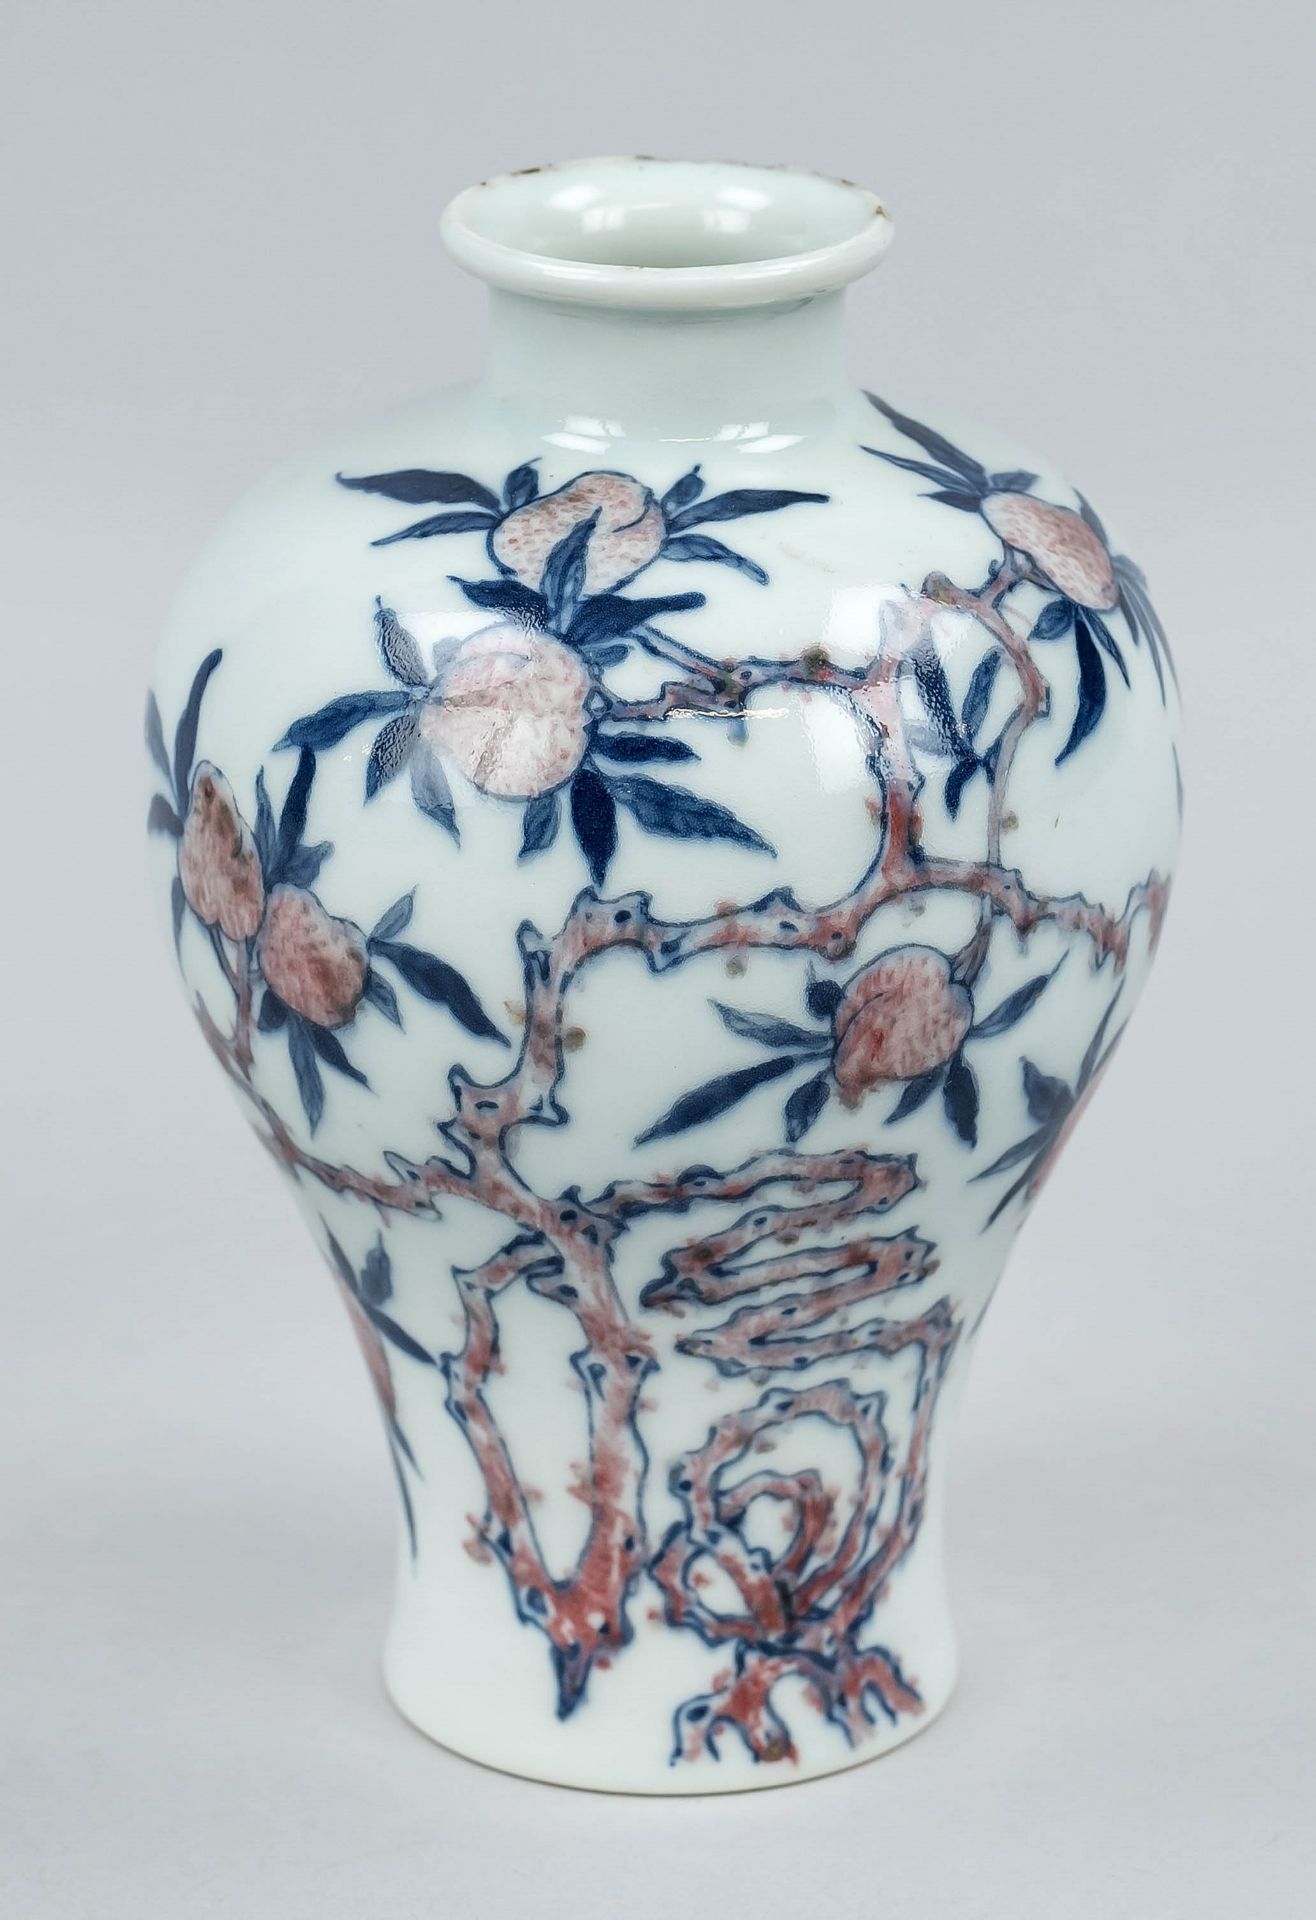 Pfirsich-Vase, China, wohl Rep